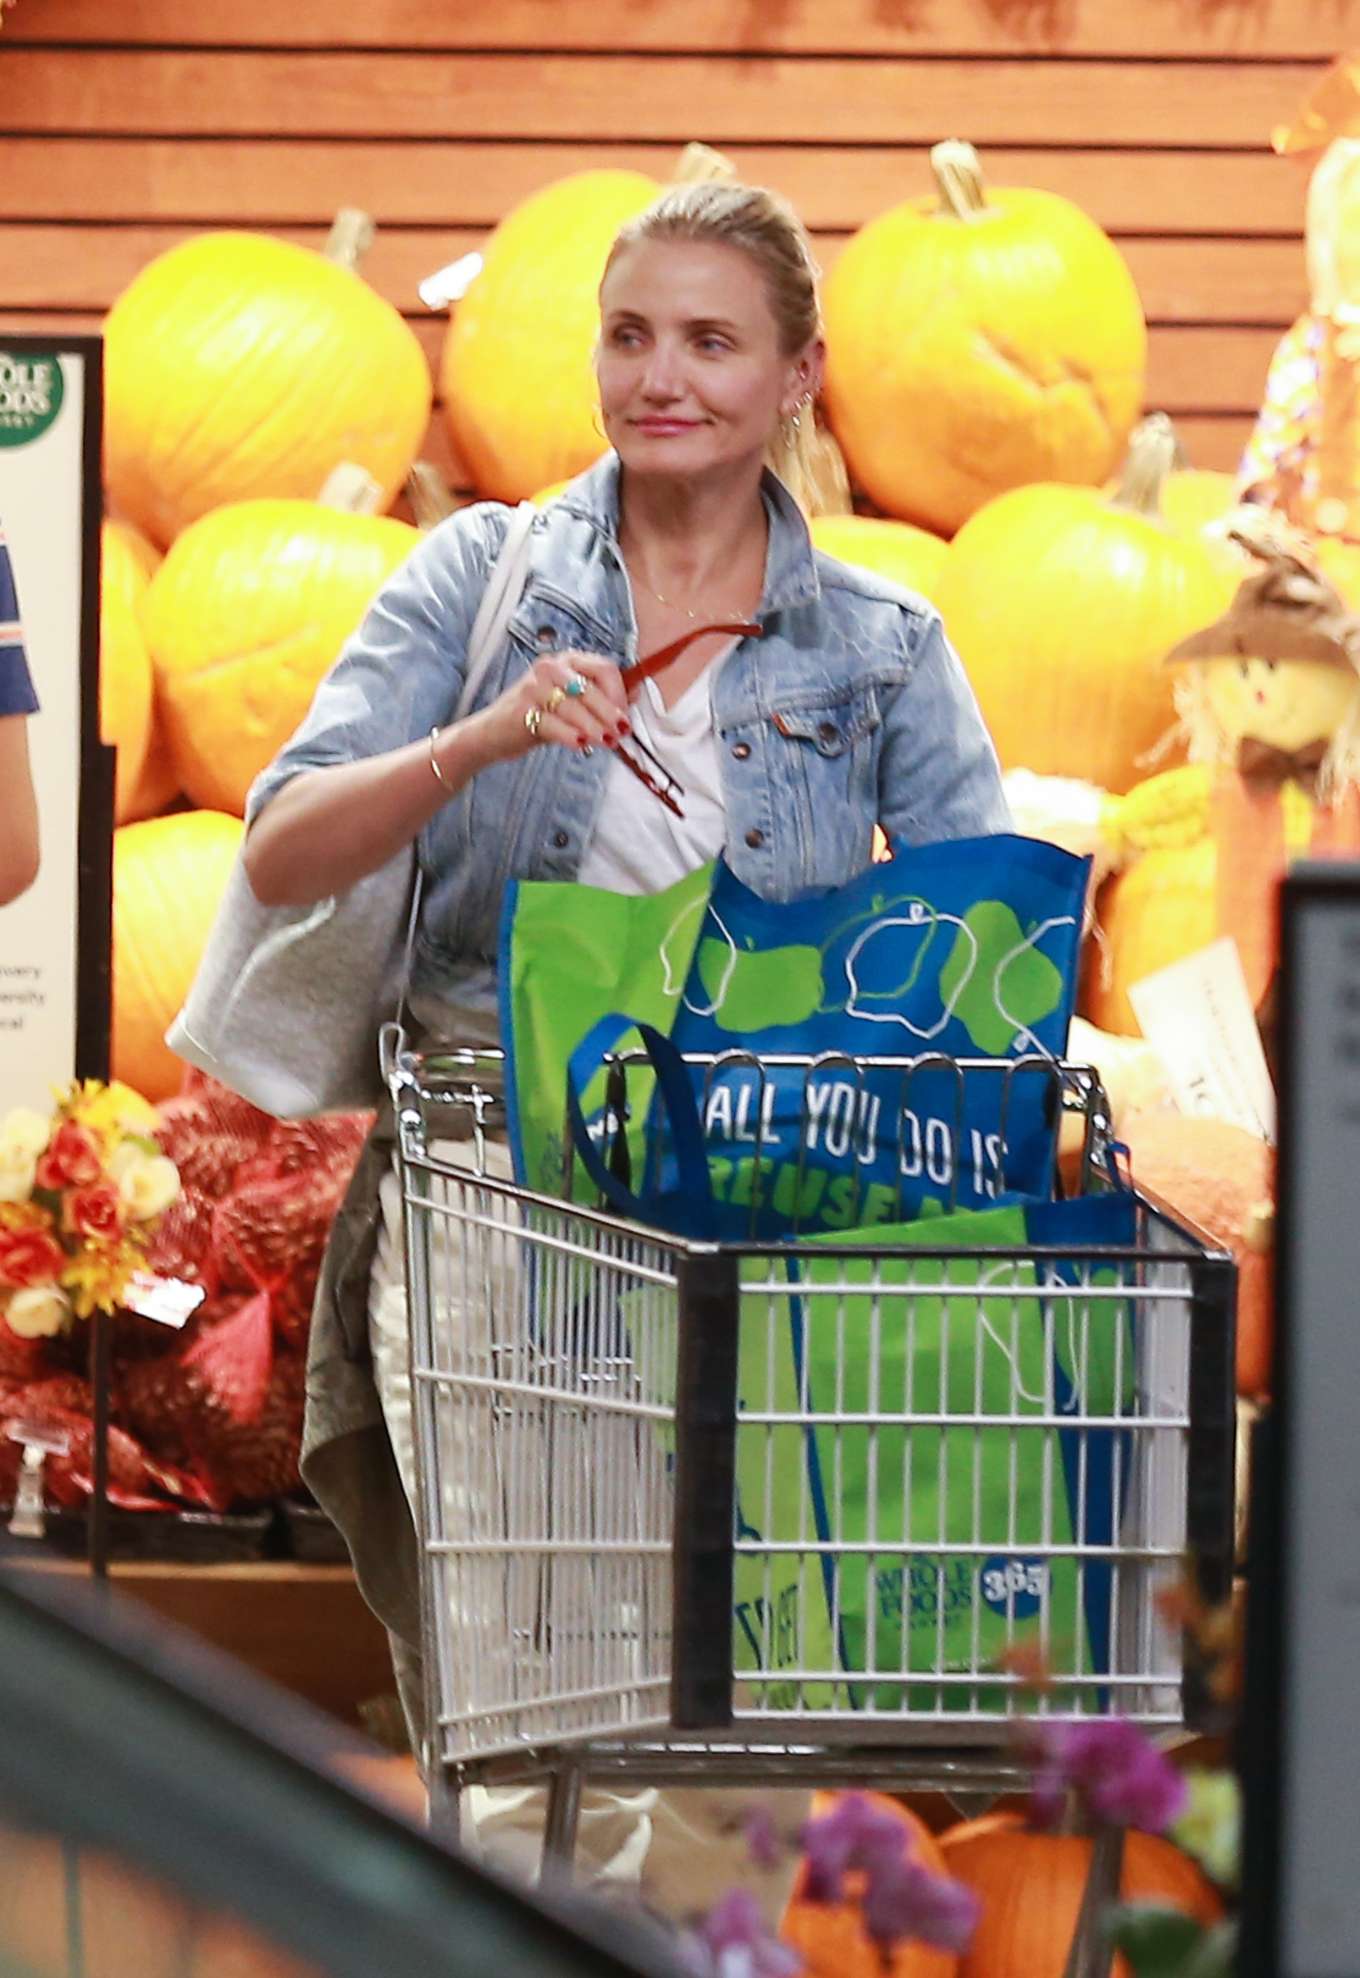 Cameron Diaz - Shopping at Whole Foods in Beverly Hills